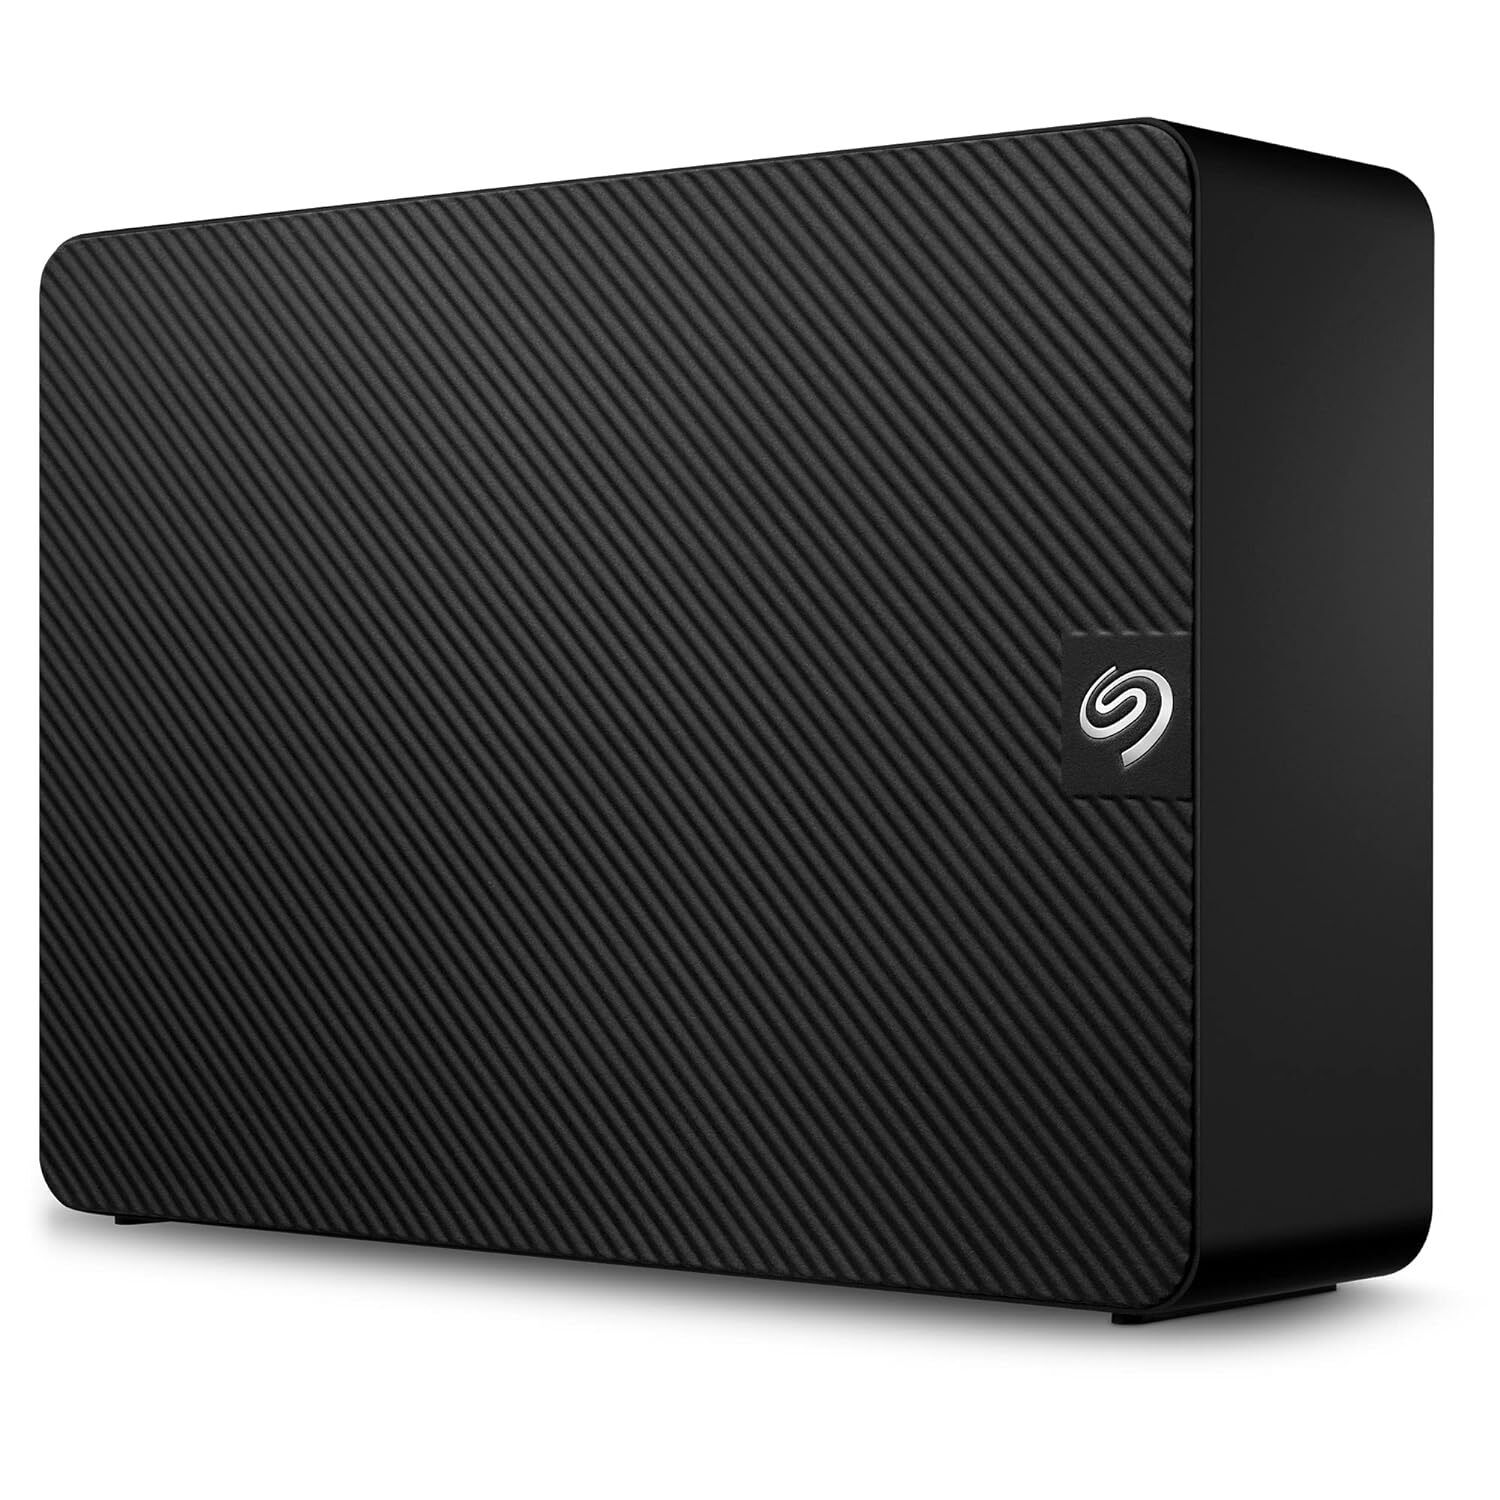 Seagate Expansion 18TB External Hard Drive HDD - USB 3.0, with Rescue Data Rec